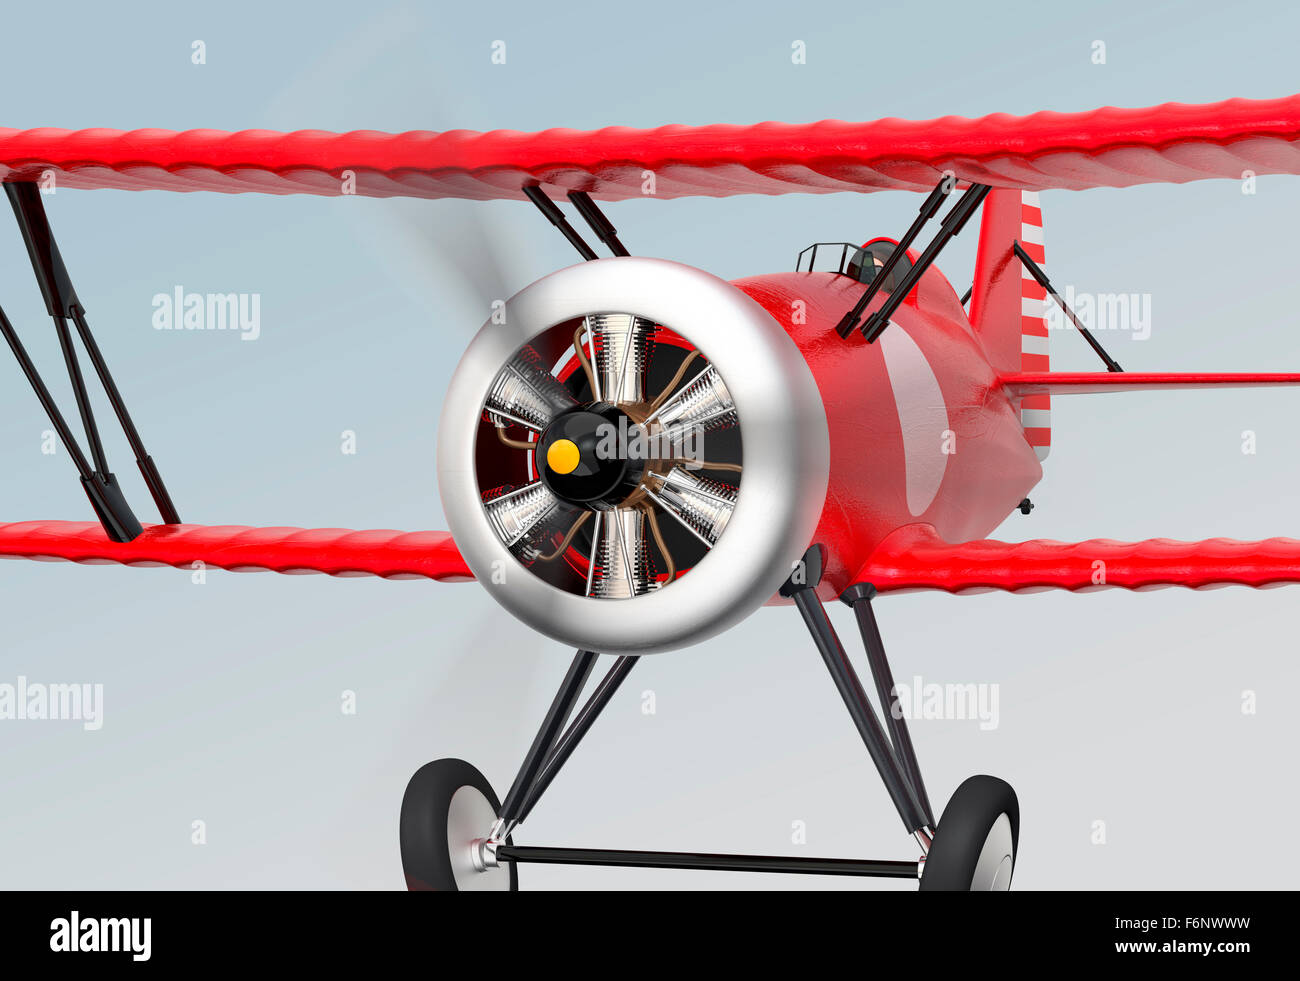 Close up view of red biplane flying in the sky. Stock Photo